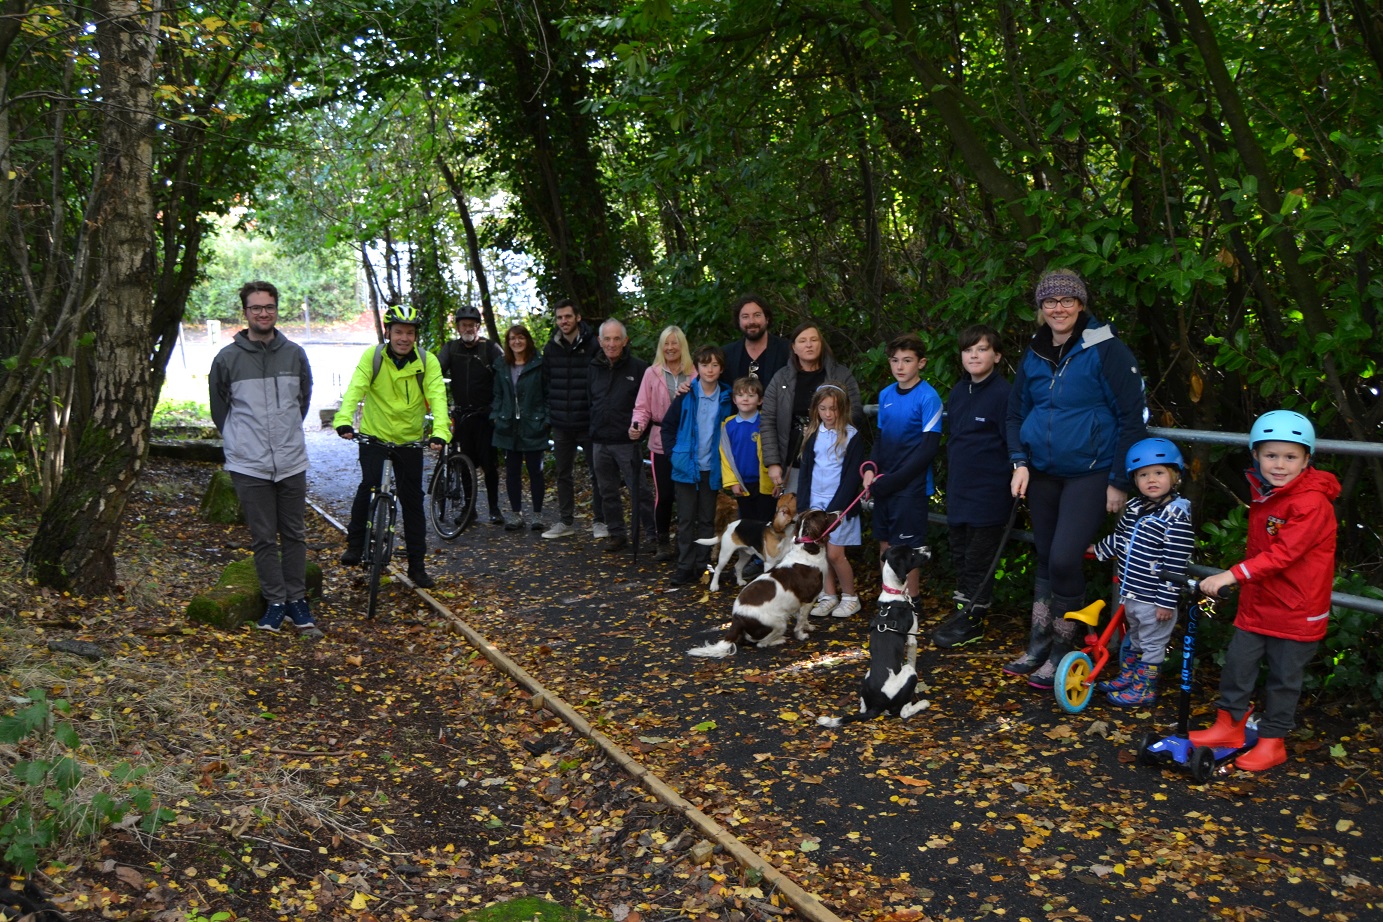 PUTTING THE PATH THROUGH ITS PACES: Cllr Paul Ferretti - Convener of Place, Neighbourhood and Corporate Assets - is pictured with members of the 'Walk, Run, Cycle in and around East Dunbartonshire' group and Christopher McGeough, the Council's Acting Team Leader - Traffic & Transport.